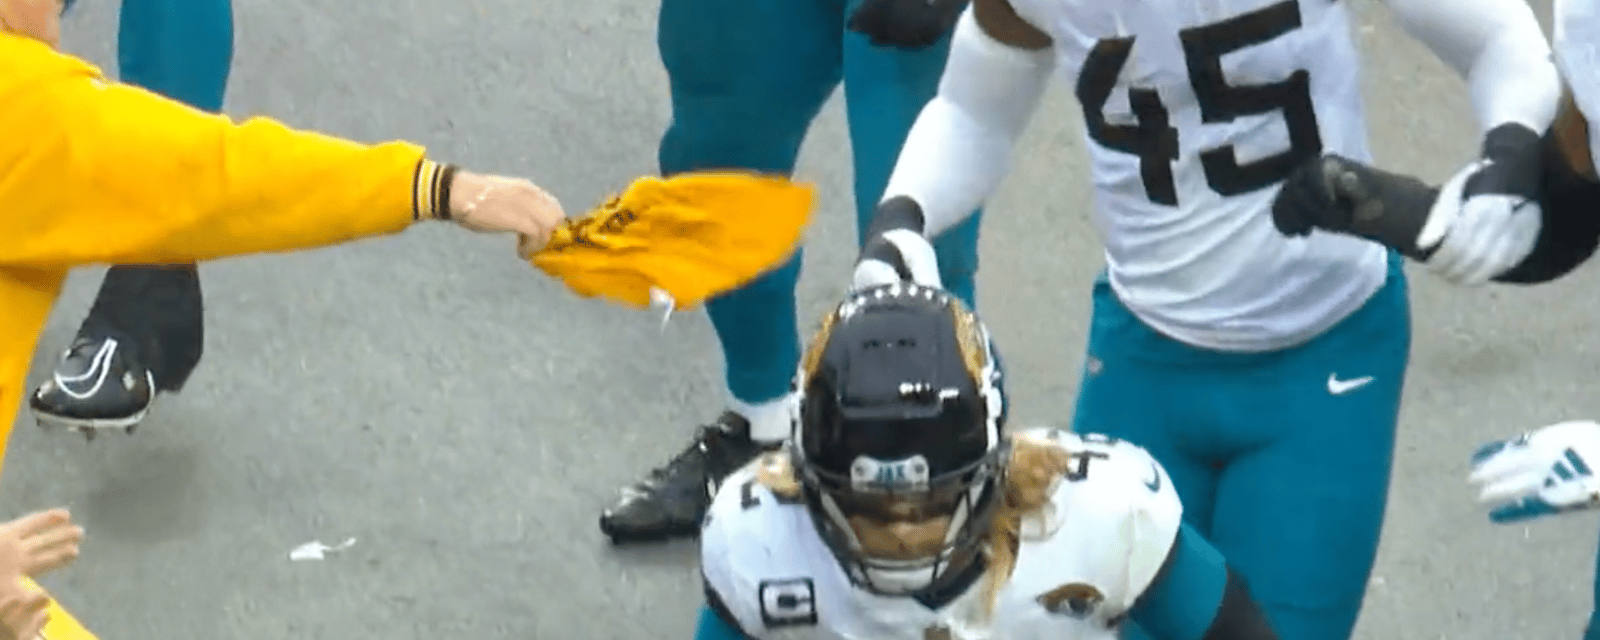 Steelers fan smacks Jags player who stole his terrible towel! 